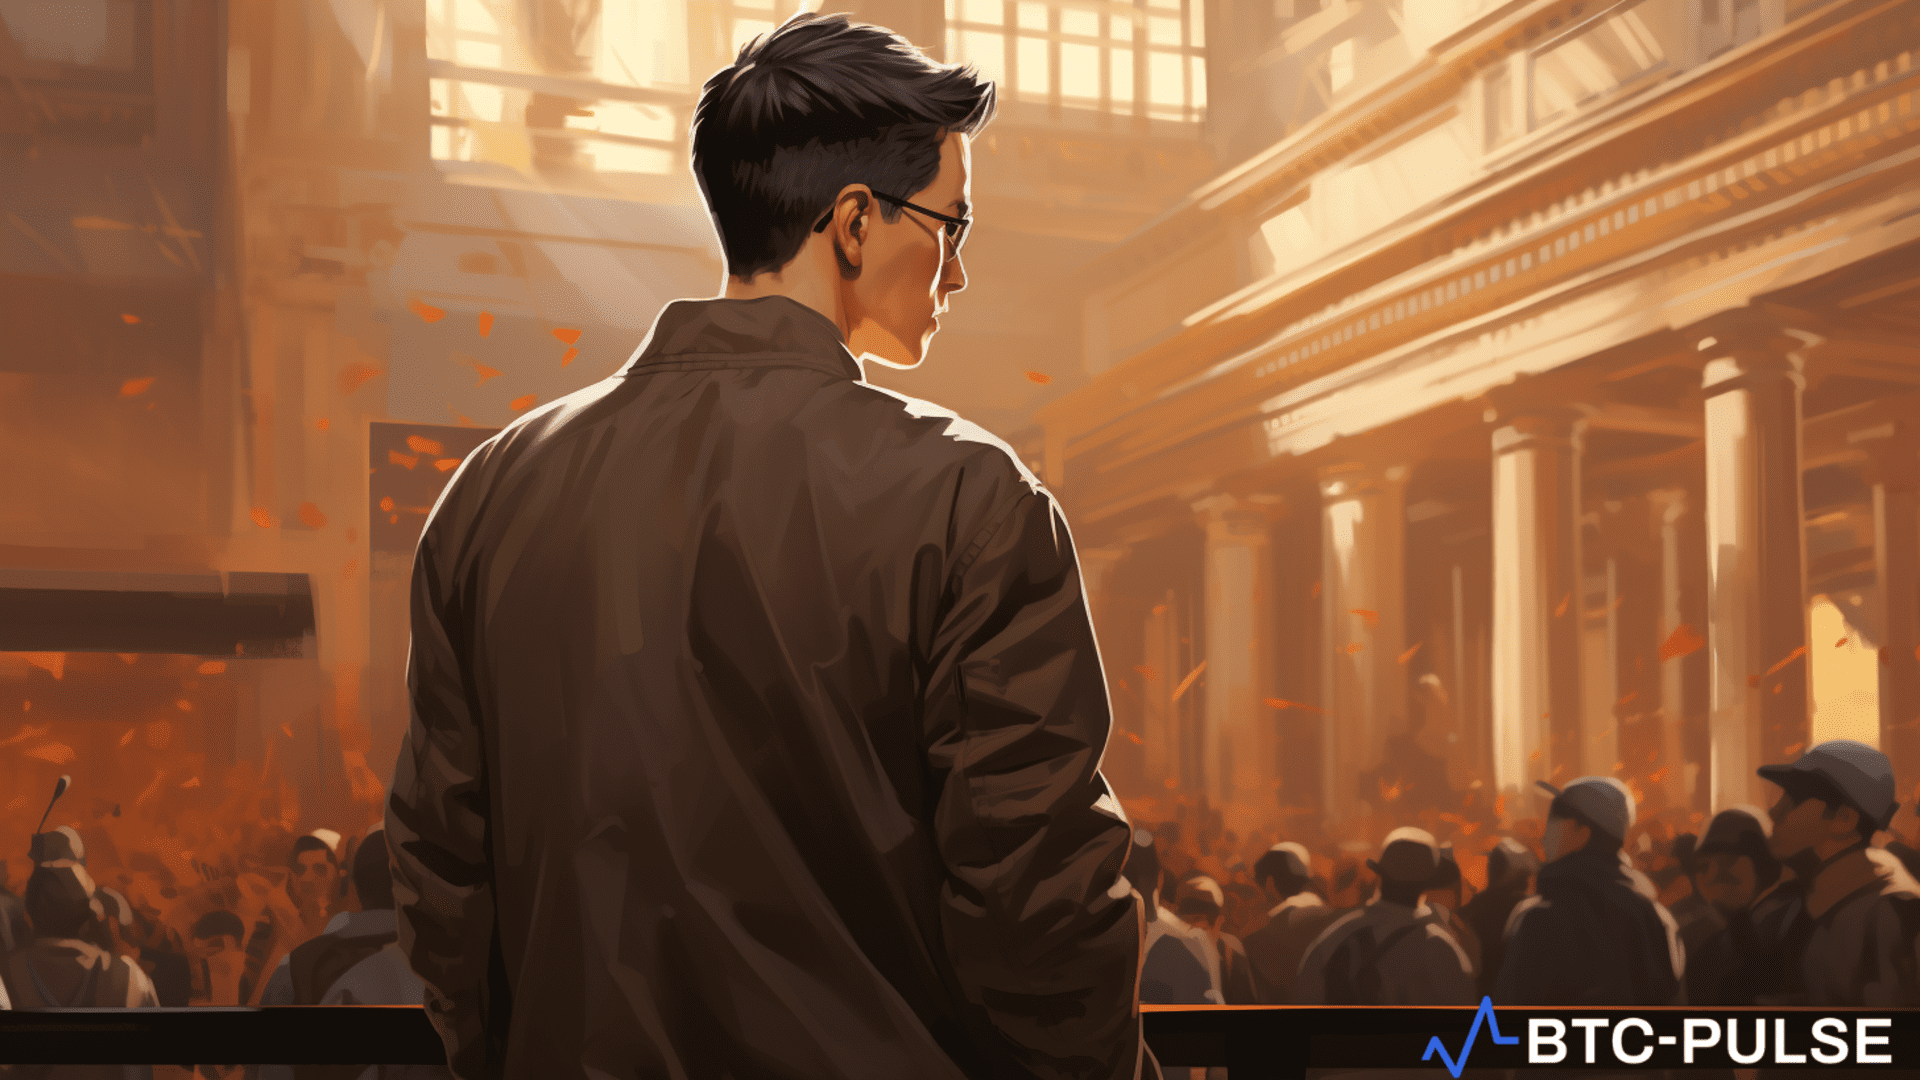 Binance founder Changpeng Zhao appearing in court during his sentencing for money laundering violations.